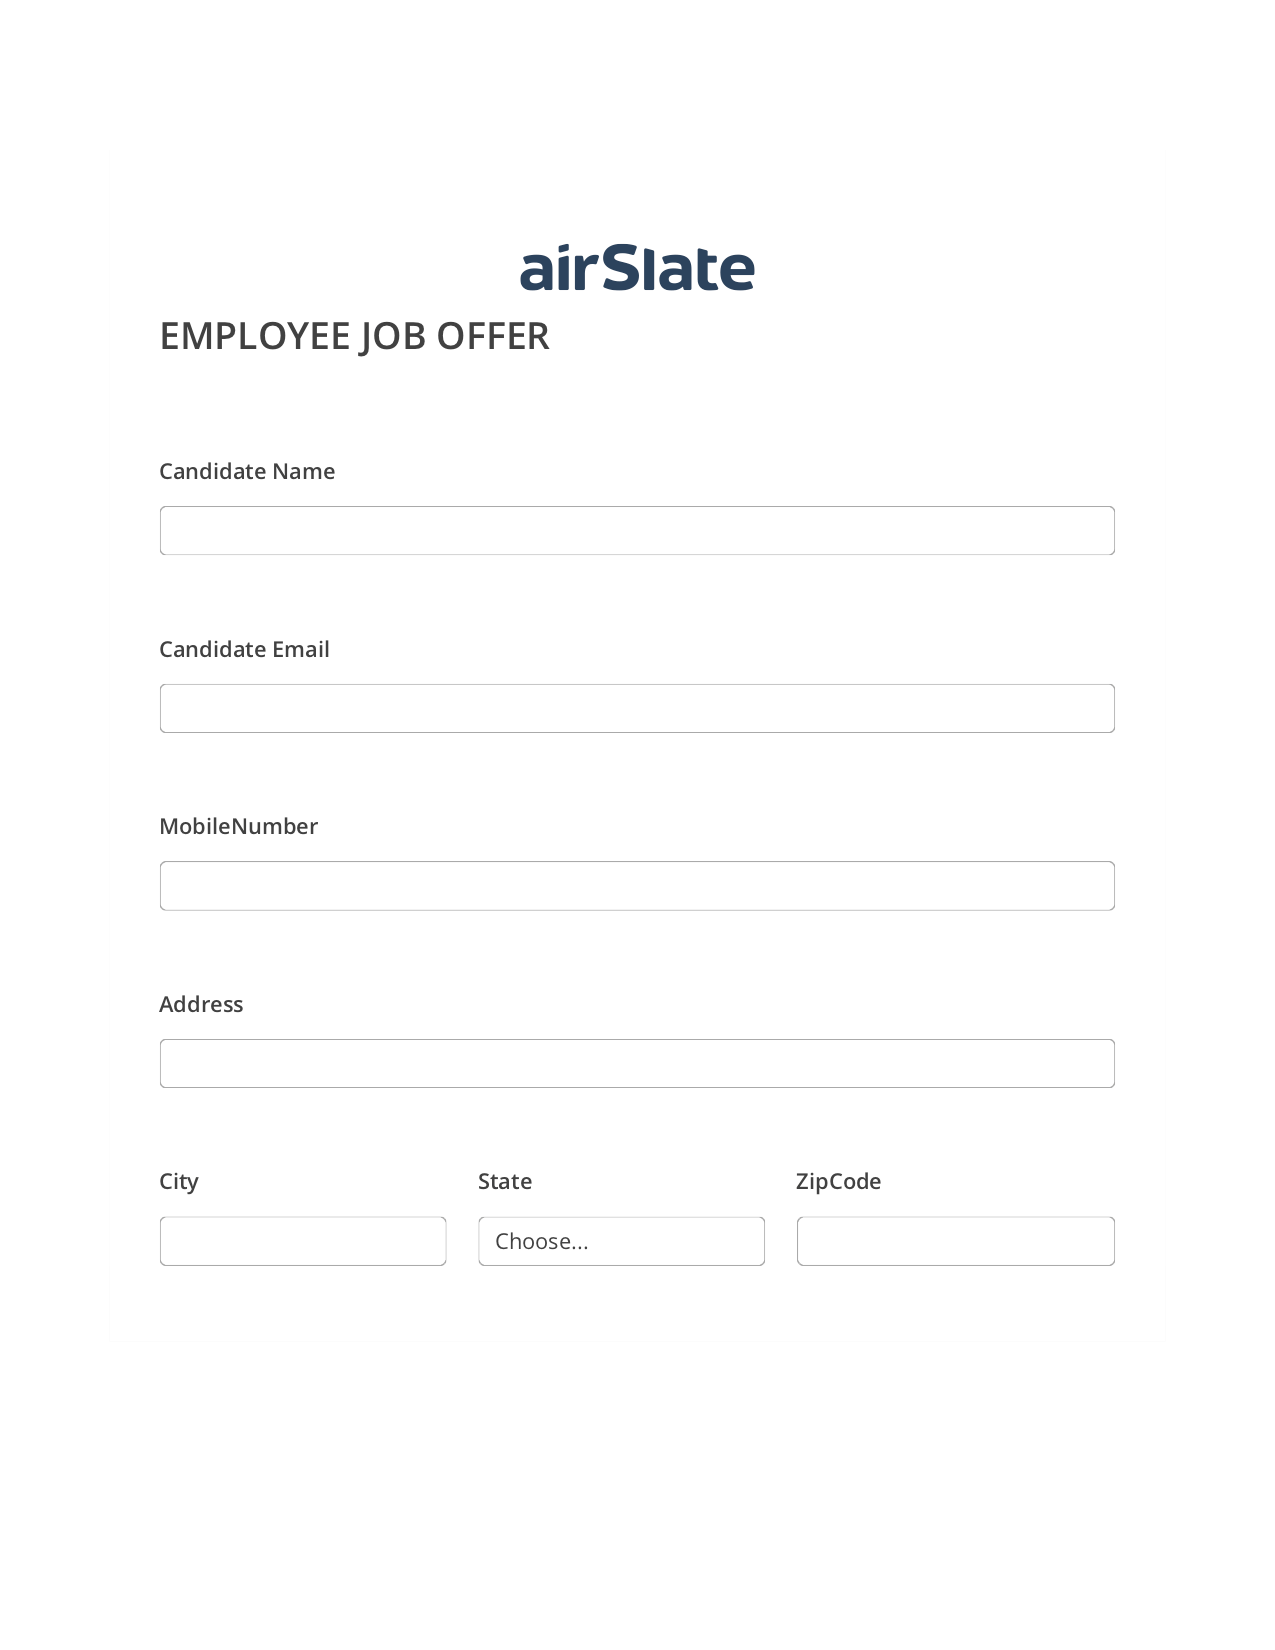 Employee Job Offer Workflow Pre-fill from CSV File Bot, Lock the Slate Bot, Export to Excel 365 Bot